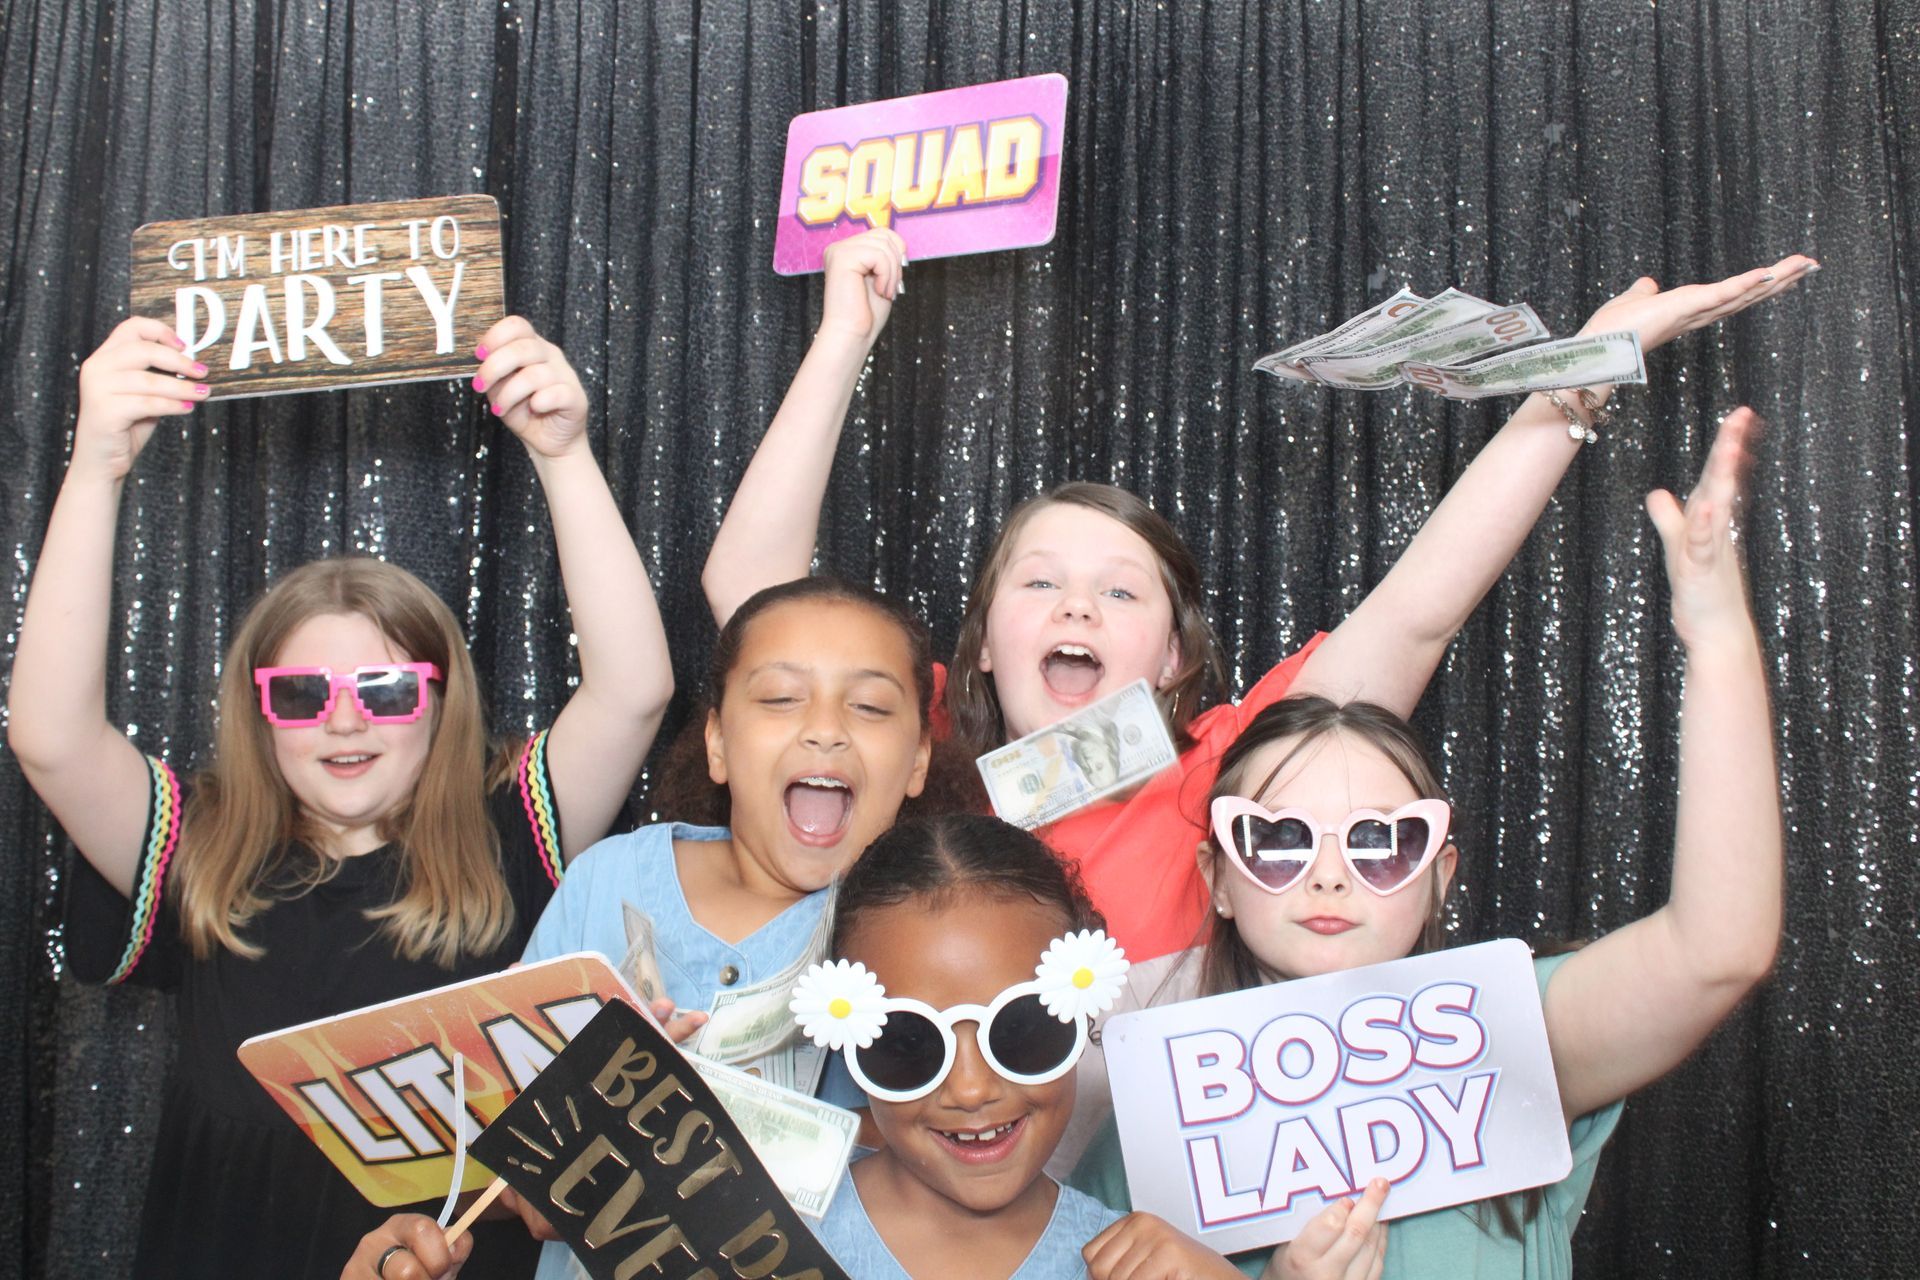 Fun props included with Sugar Land photo booth rentals for weddings, birthdays, corporate events